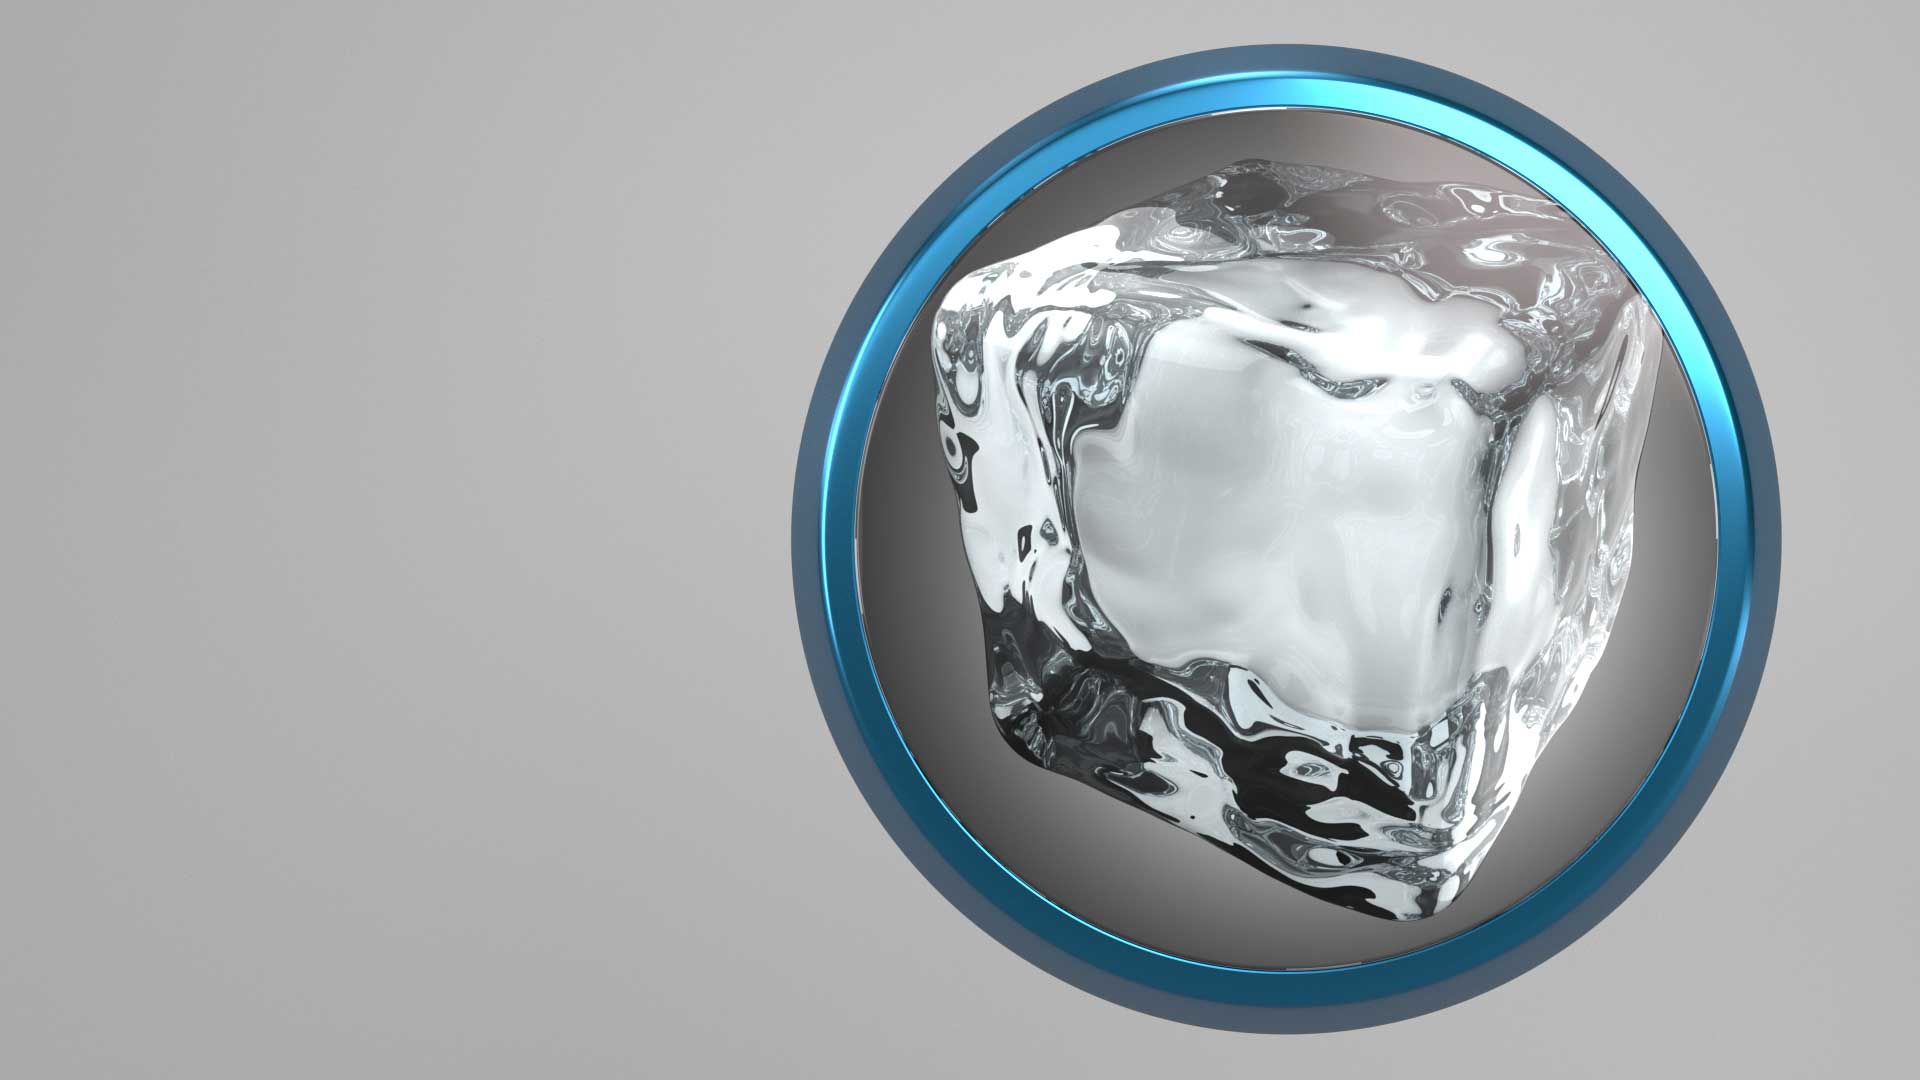 Ice Cubes for Cinema 4D from helloluxx by Dan Couto